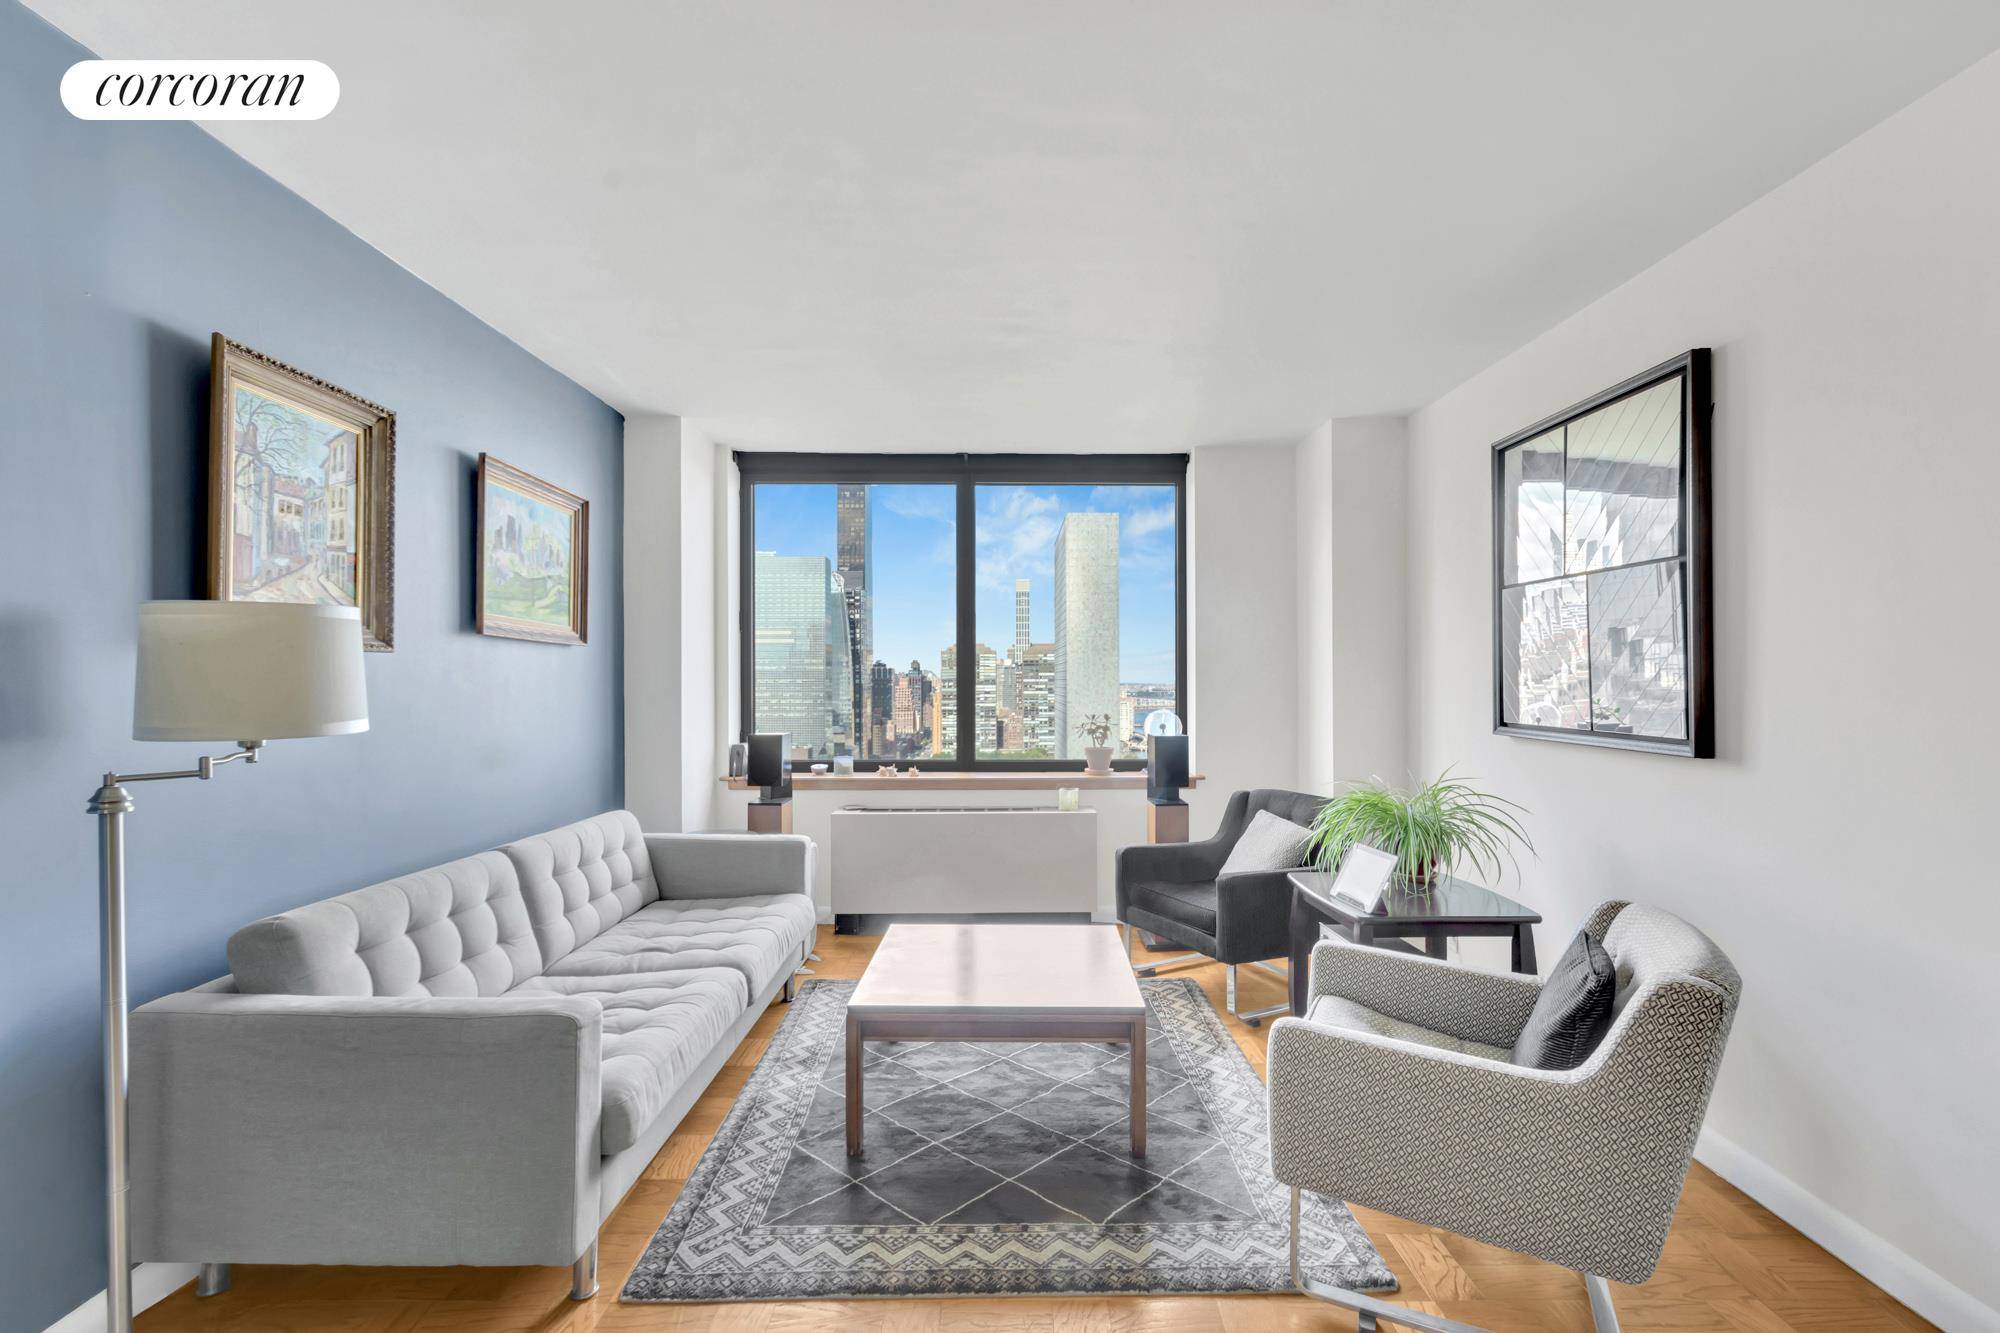 Amazing opportunity ! Perched on the 34th floor, this luminous 1 bedroom, 1 bath apartment in an elite, full service Murray Hill condo has Northern amp ; Eastern exposures with ...